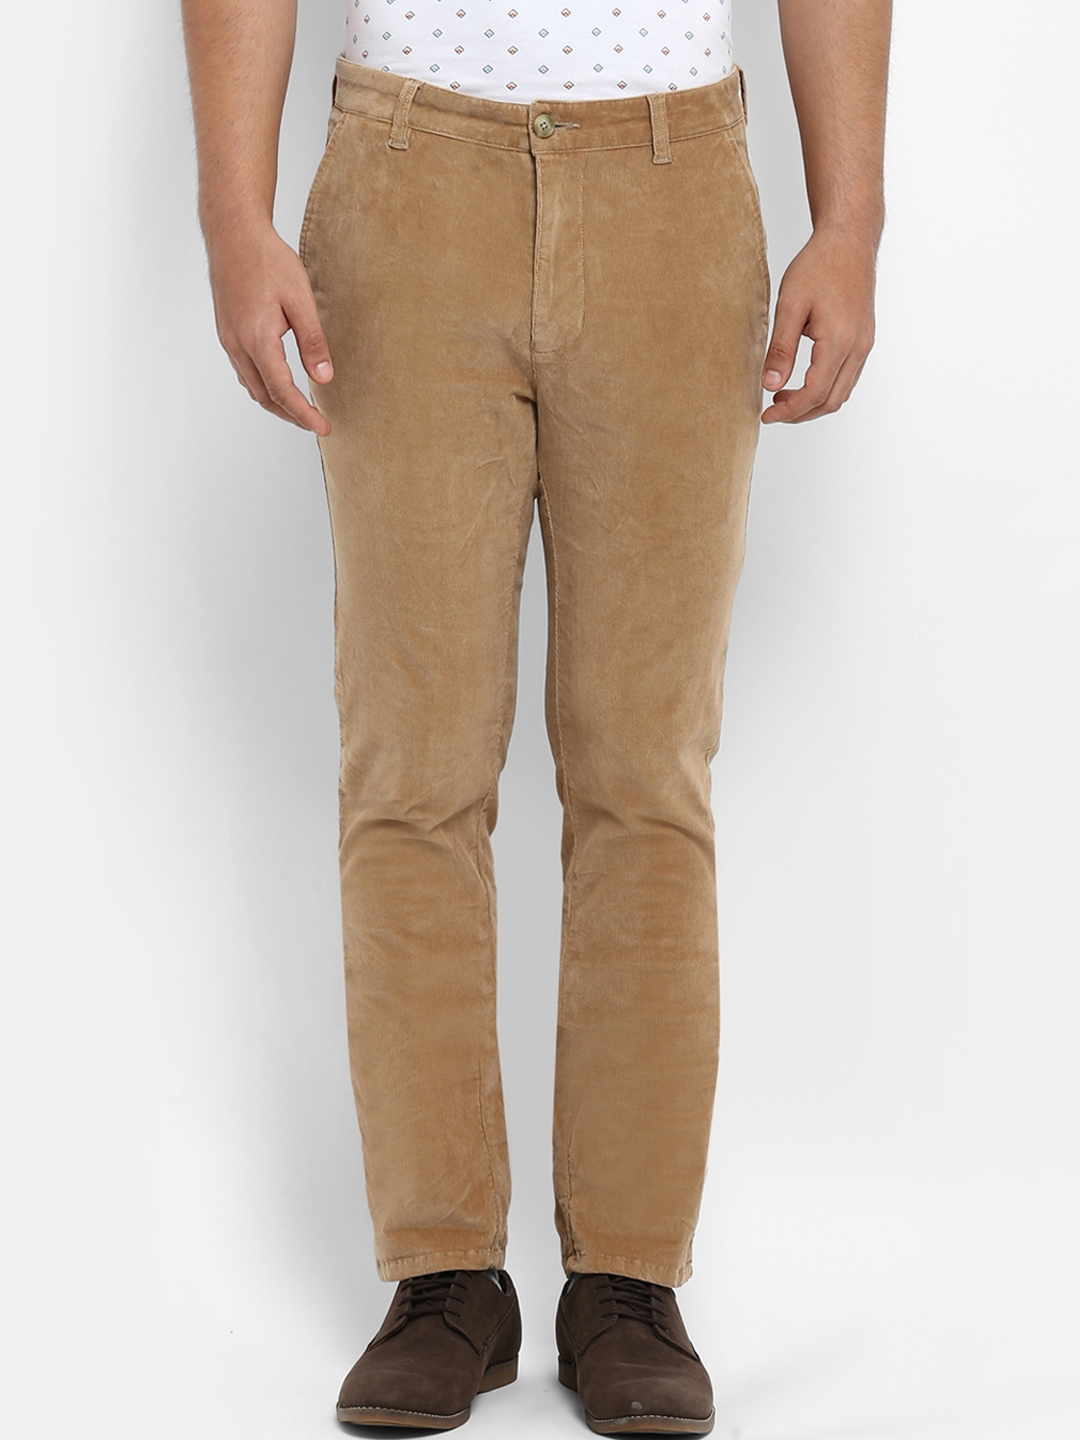 Parx Casual Trousers  Buy Parx Dark Brown Trouser Online  Nykaa Fashion